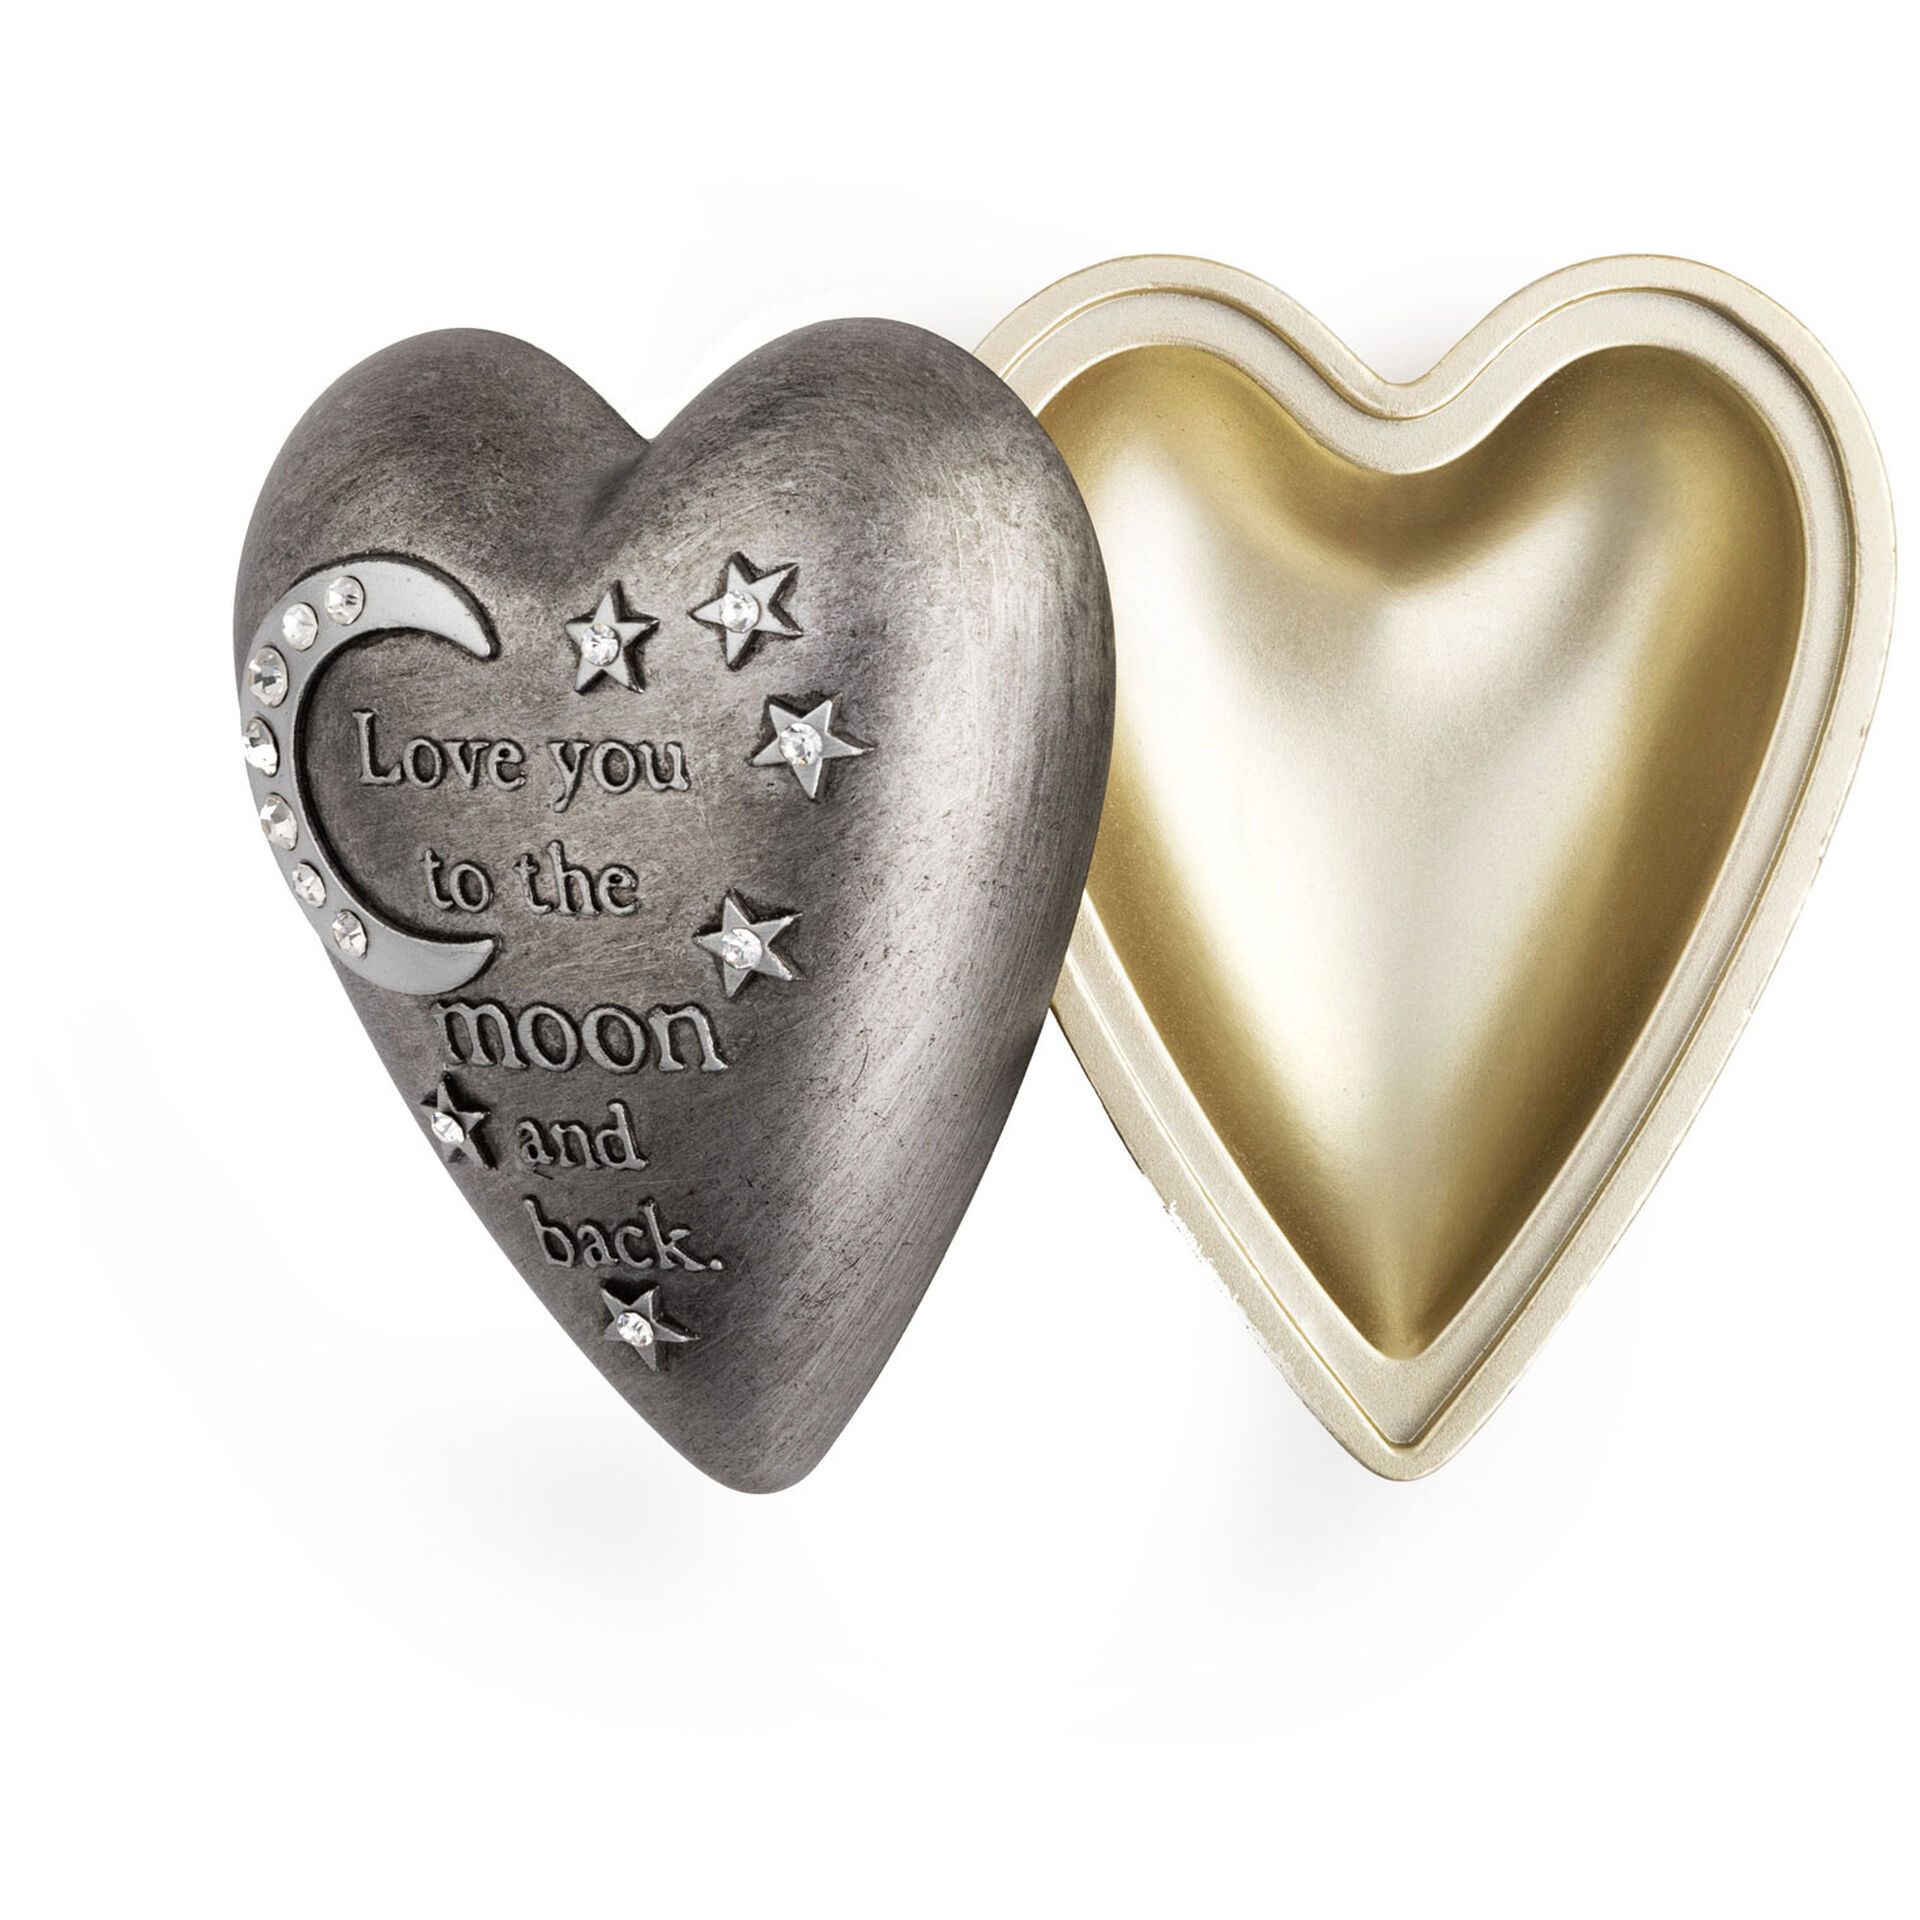 Grandma I Love You To The Moon and Back Heart Shaped Trinket Box Presents For Birthday 